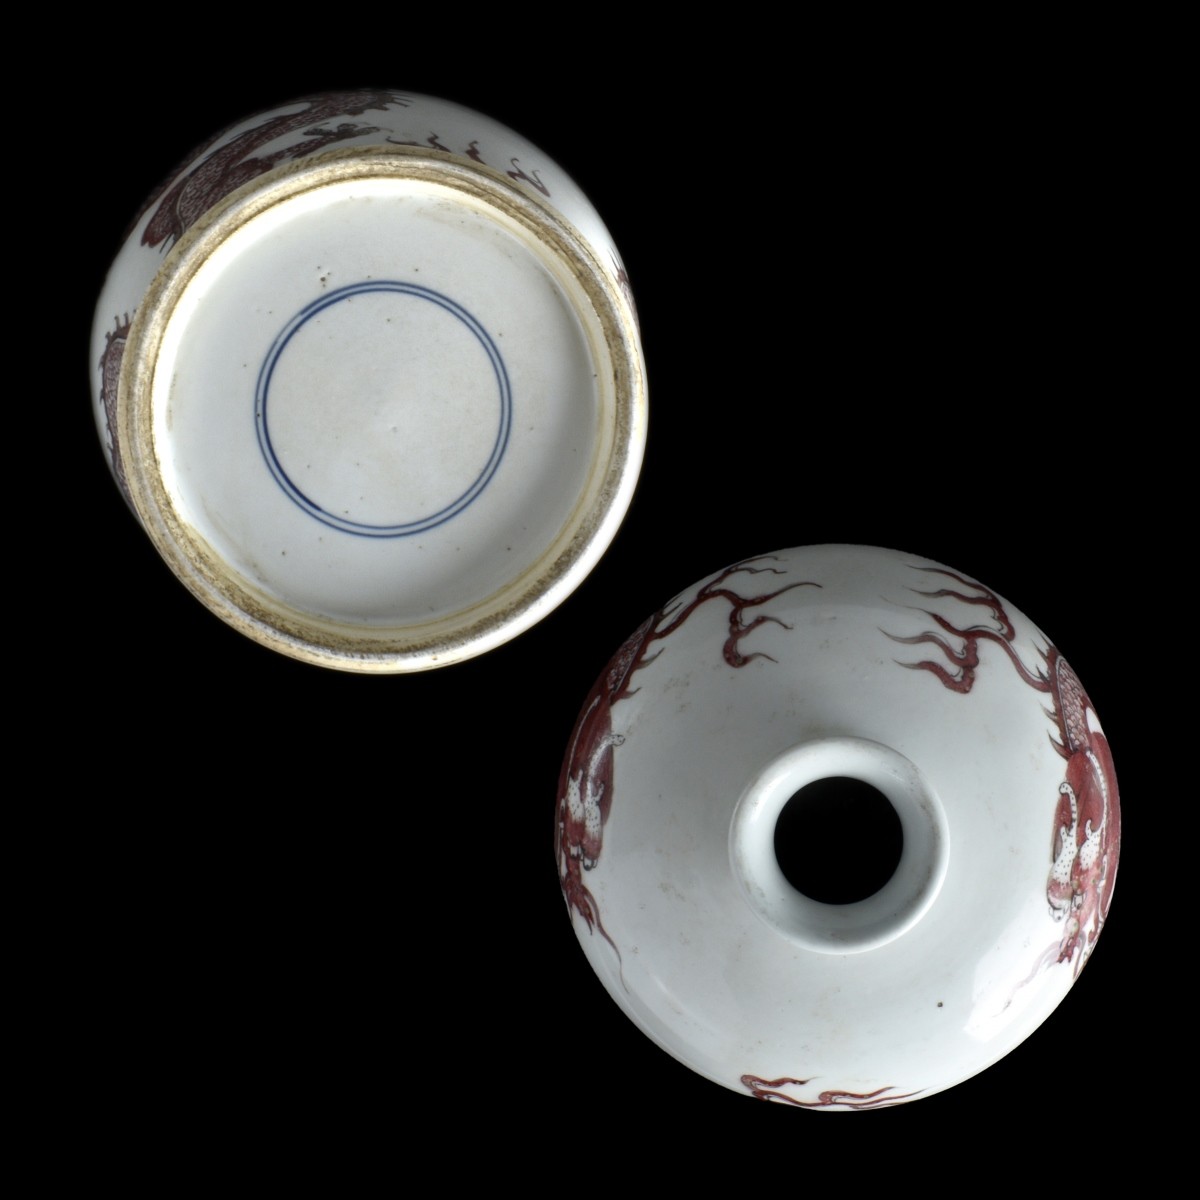 Chinese Meiping Porcelain Vase